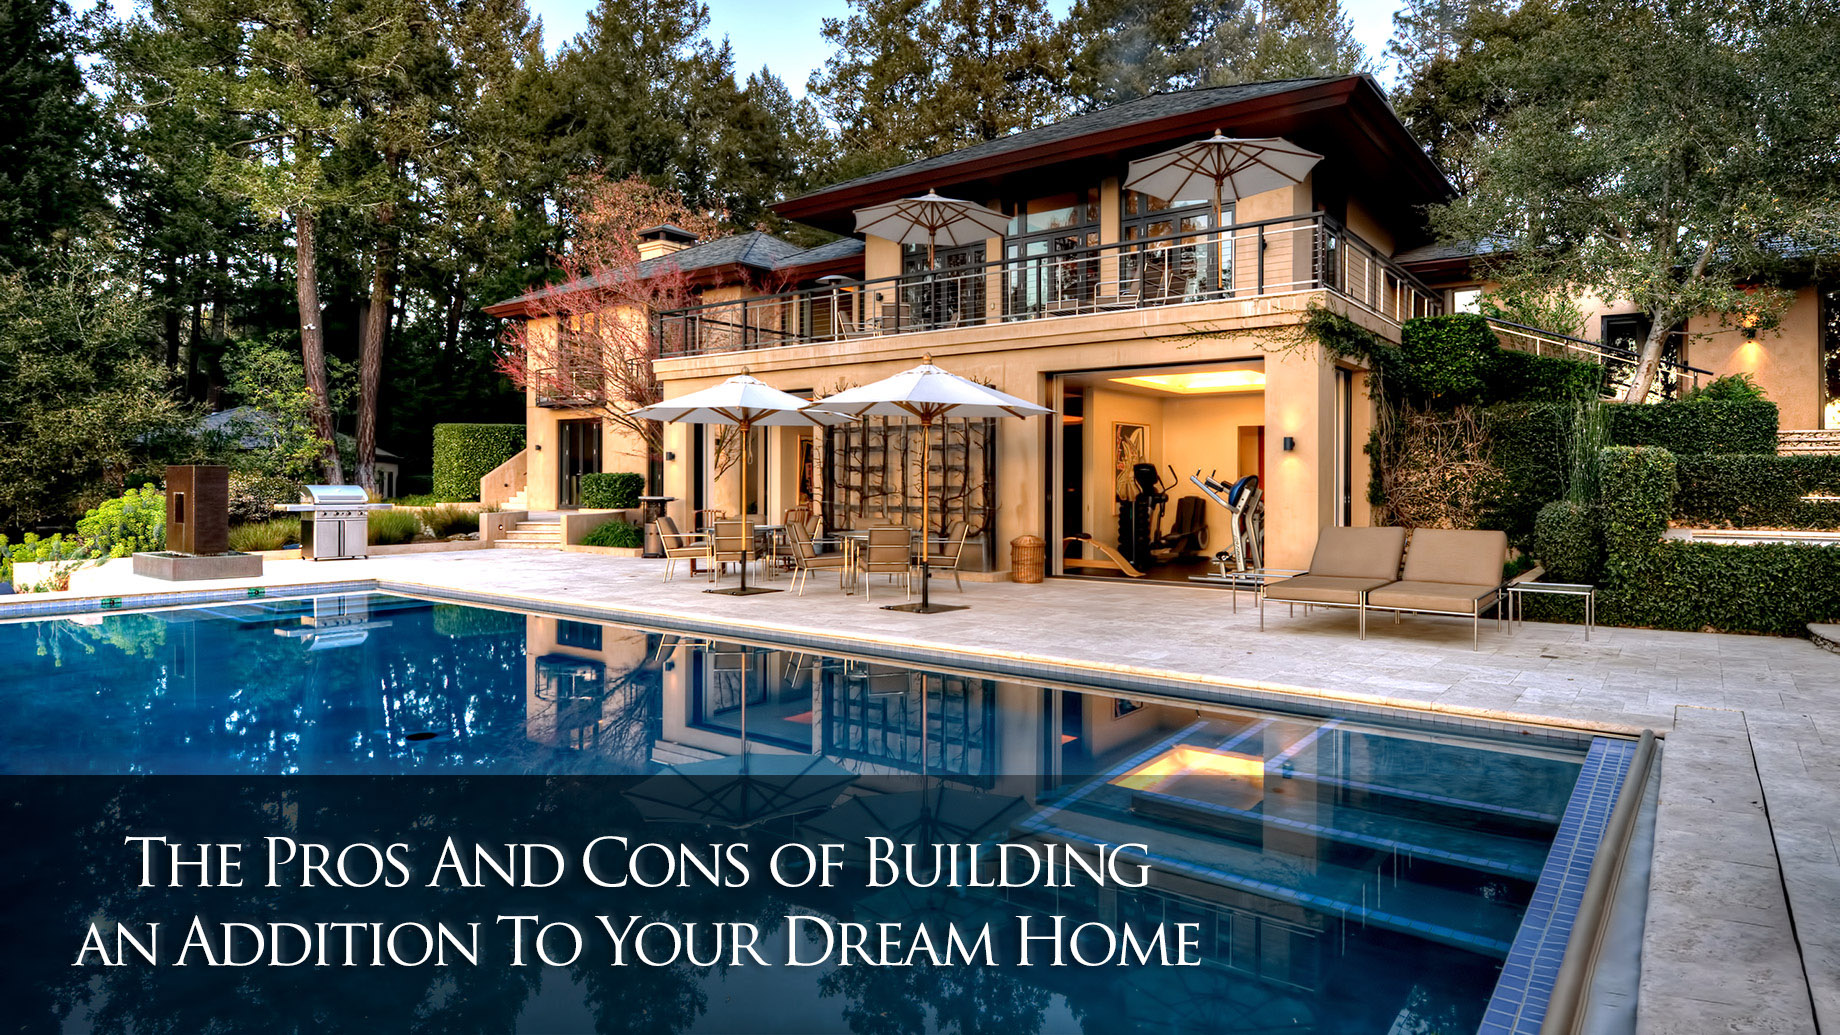 The Pros and Cons of Building an Addition To Your Dream Home